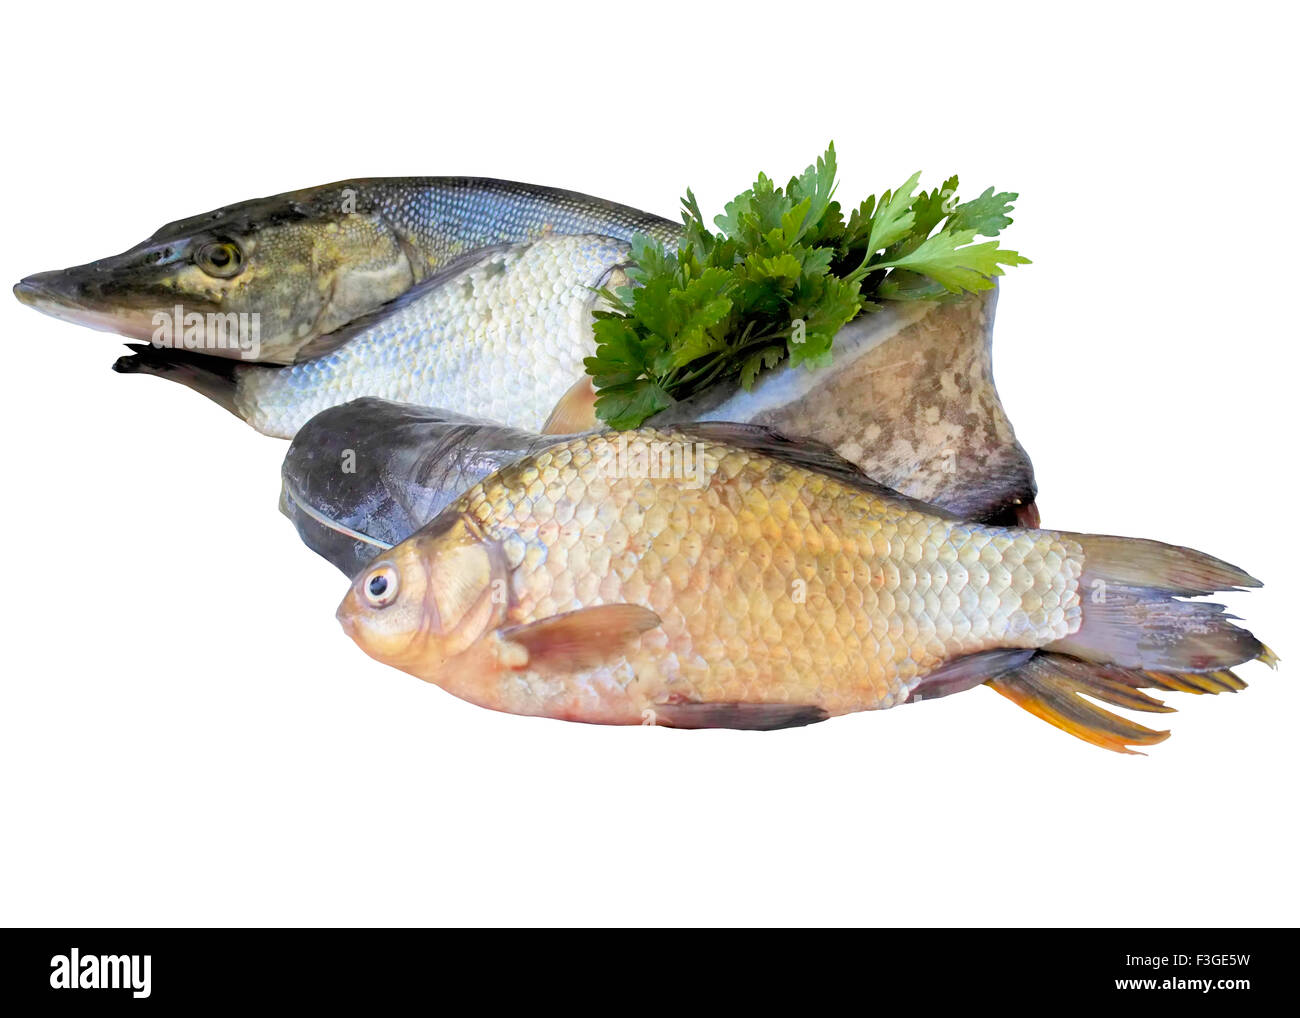 Fish, river, isolated, meal, many, catfish, hobbies, green, white, tail. Stock Photo